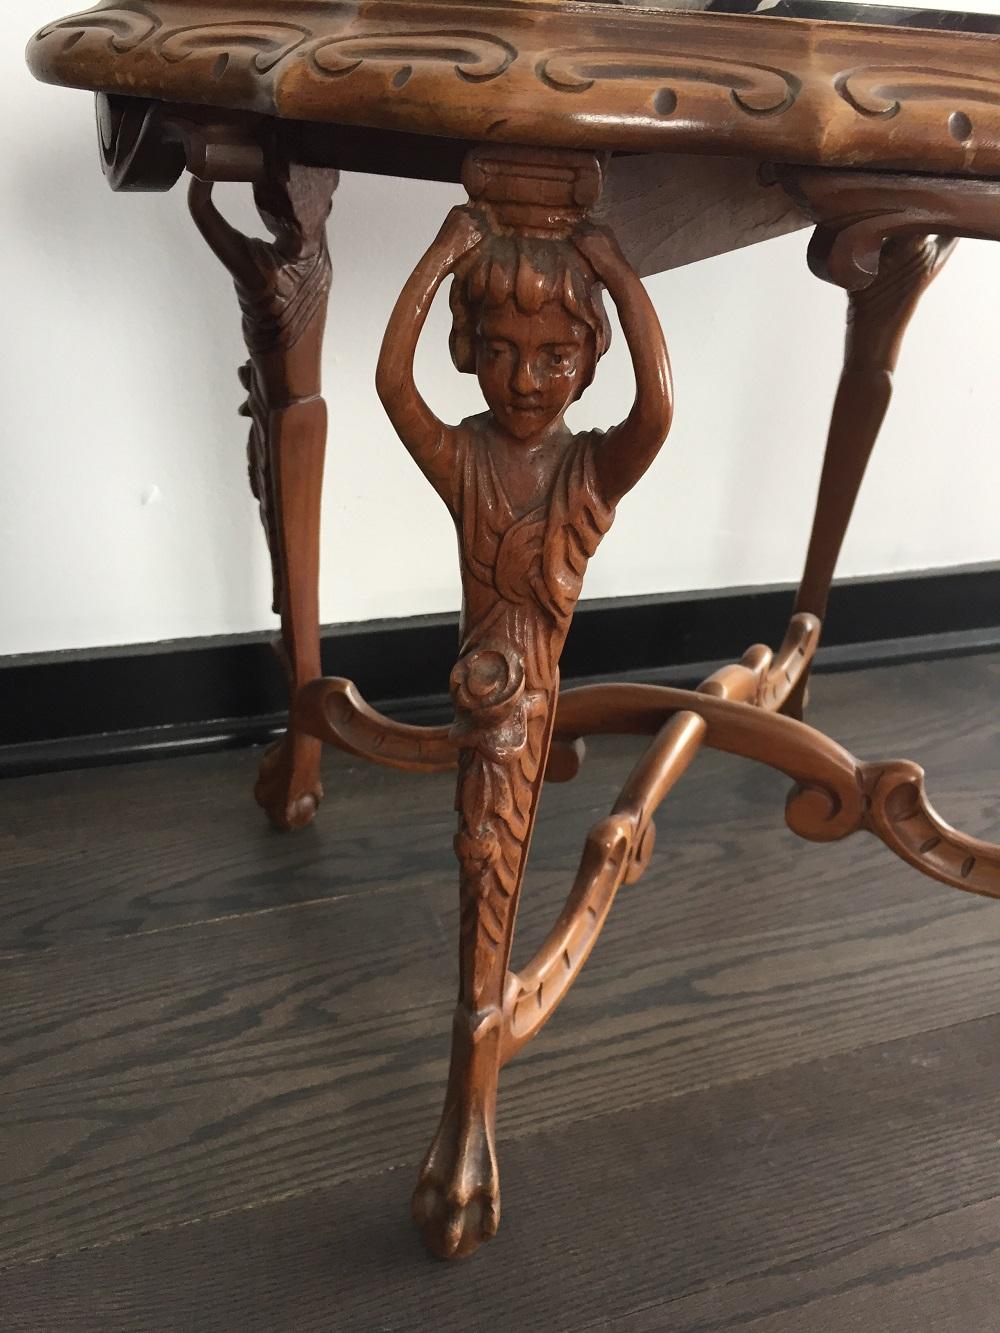 One of a kind French antique table with carved legs 
Black veined marble 
intricate detail
legs carved as figures from single piece of wood 
ball and claw feet 
incredible!